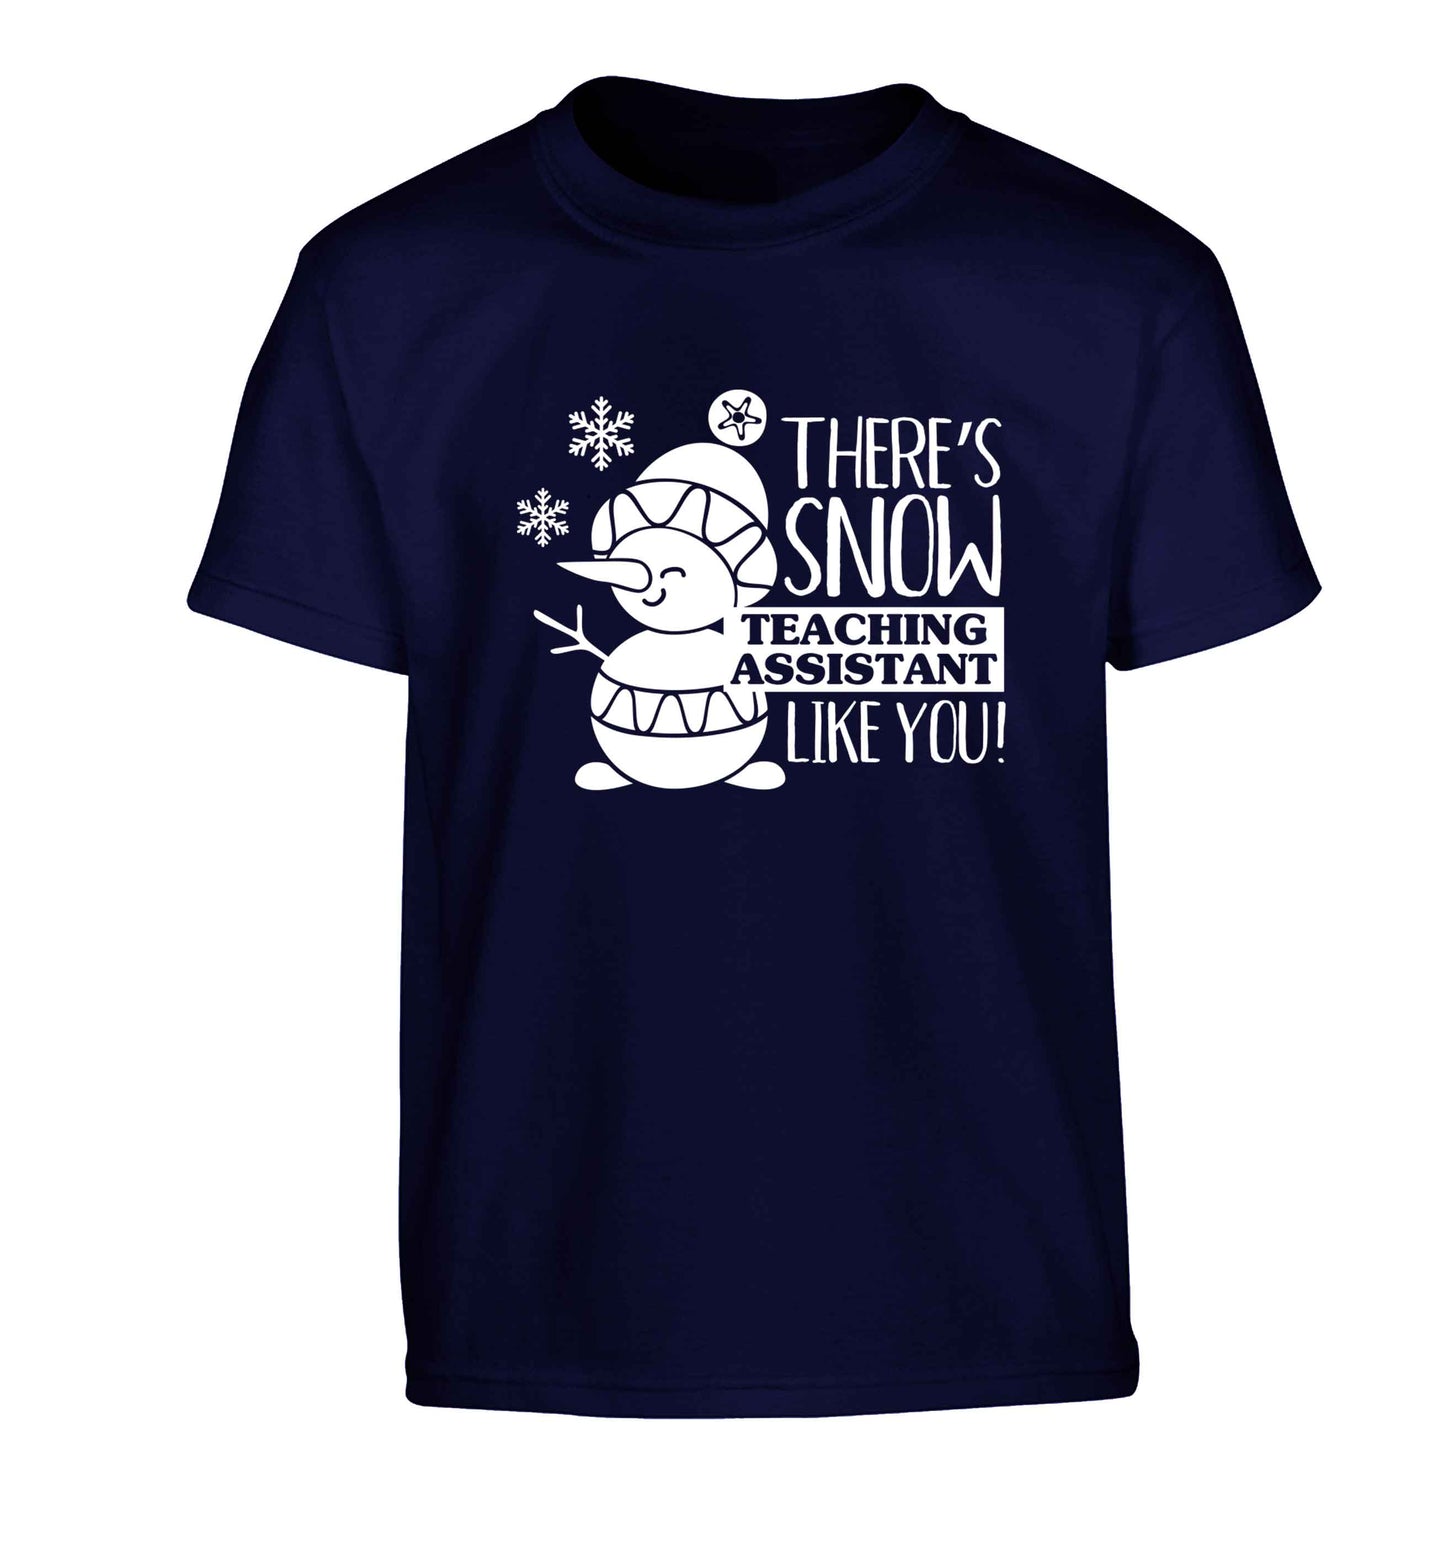 There's snow teaching assistant like you Children's navy Tshirt 12-13 Years